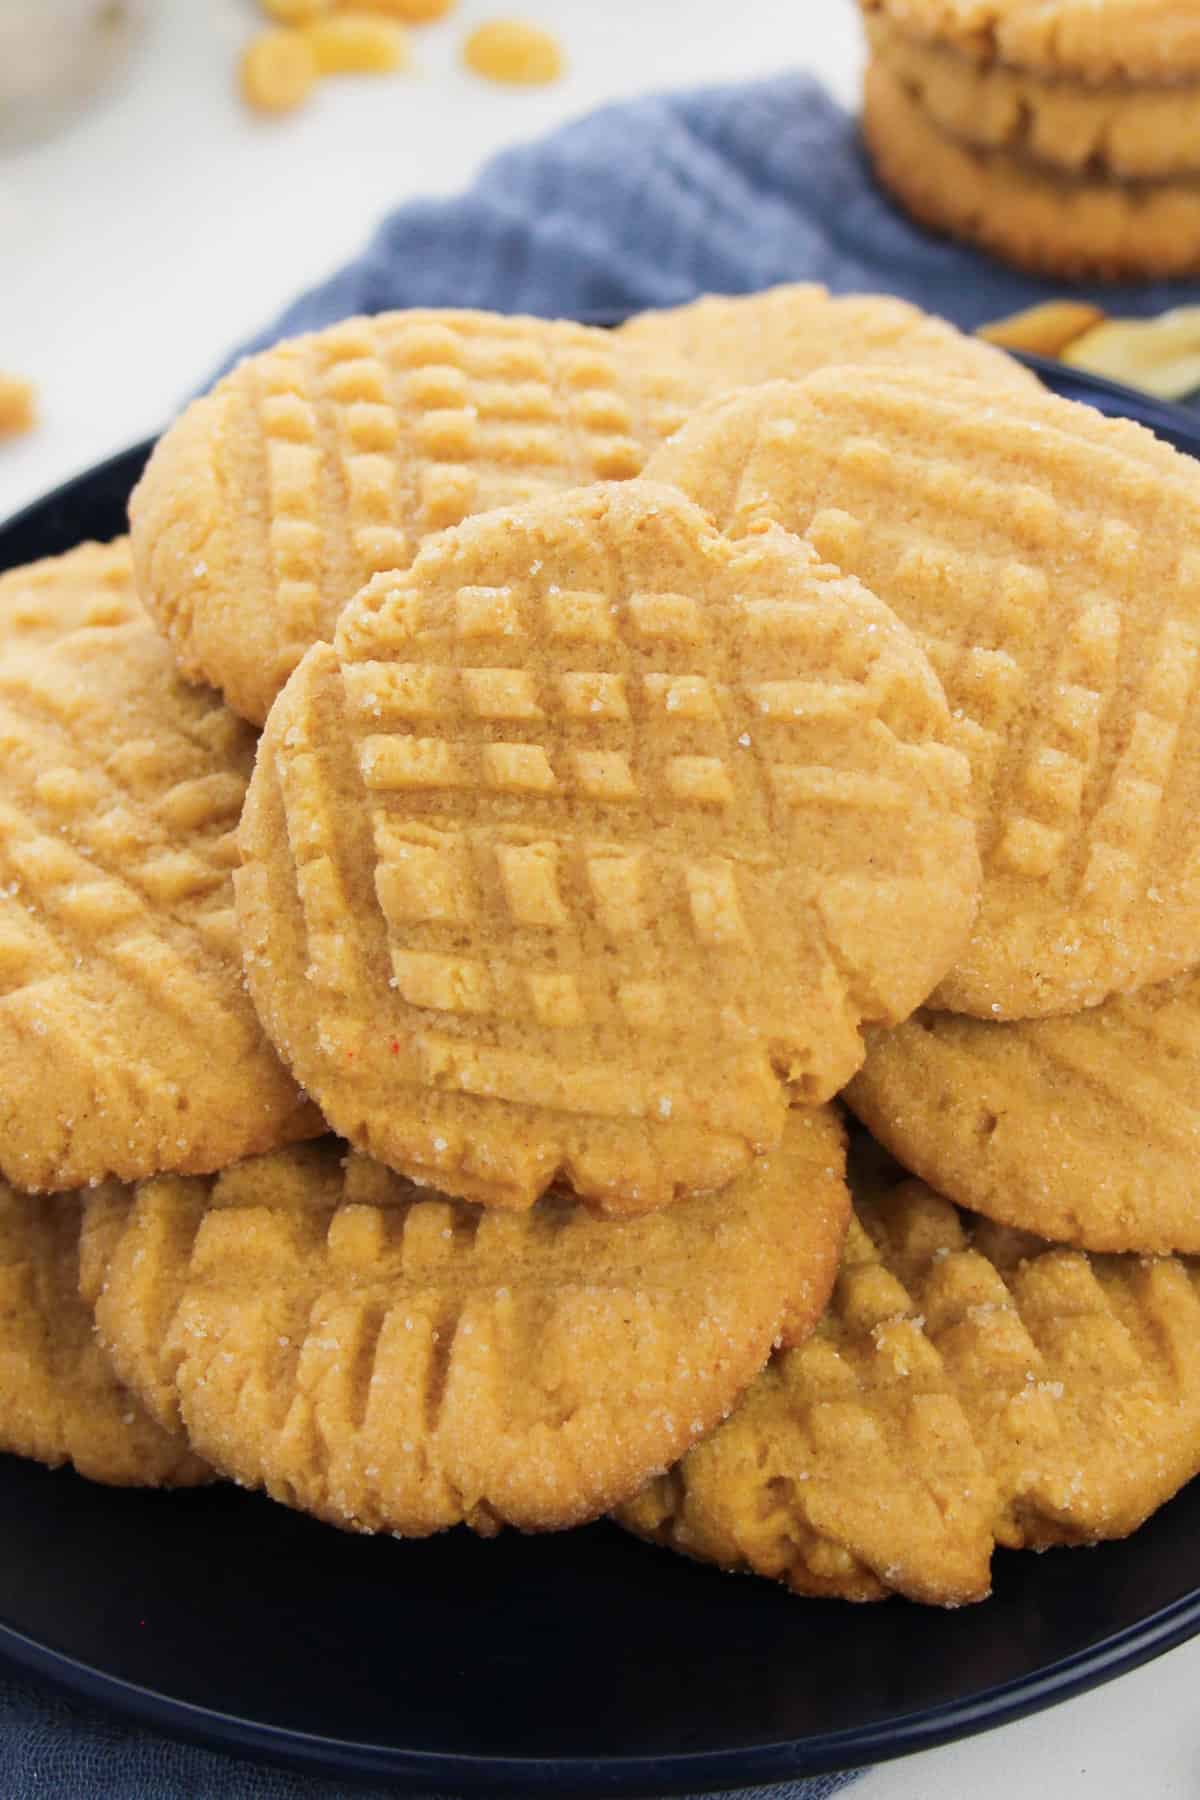 Batch of cake mix peanut butter cookies with criss-cross pattern pressed in the top piled on a black plate.